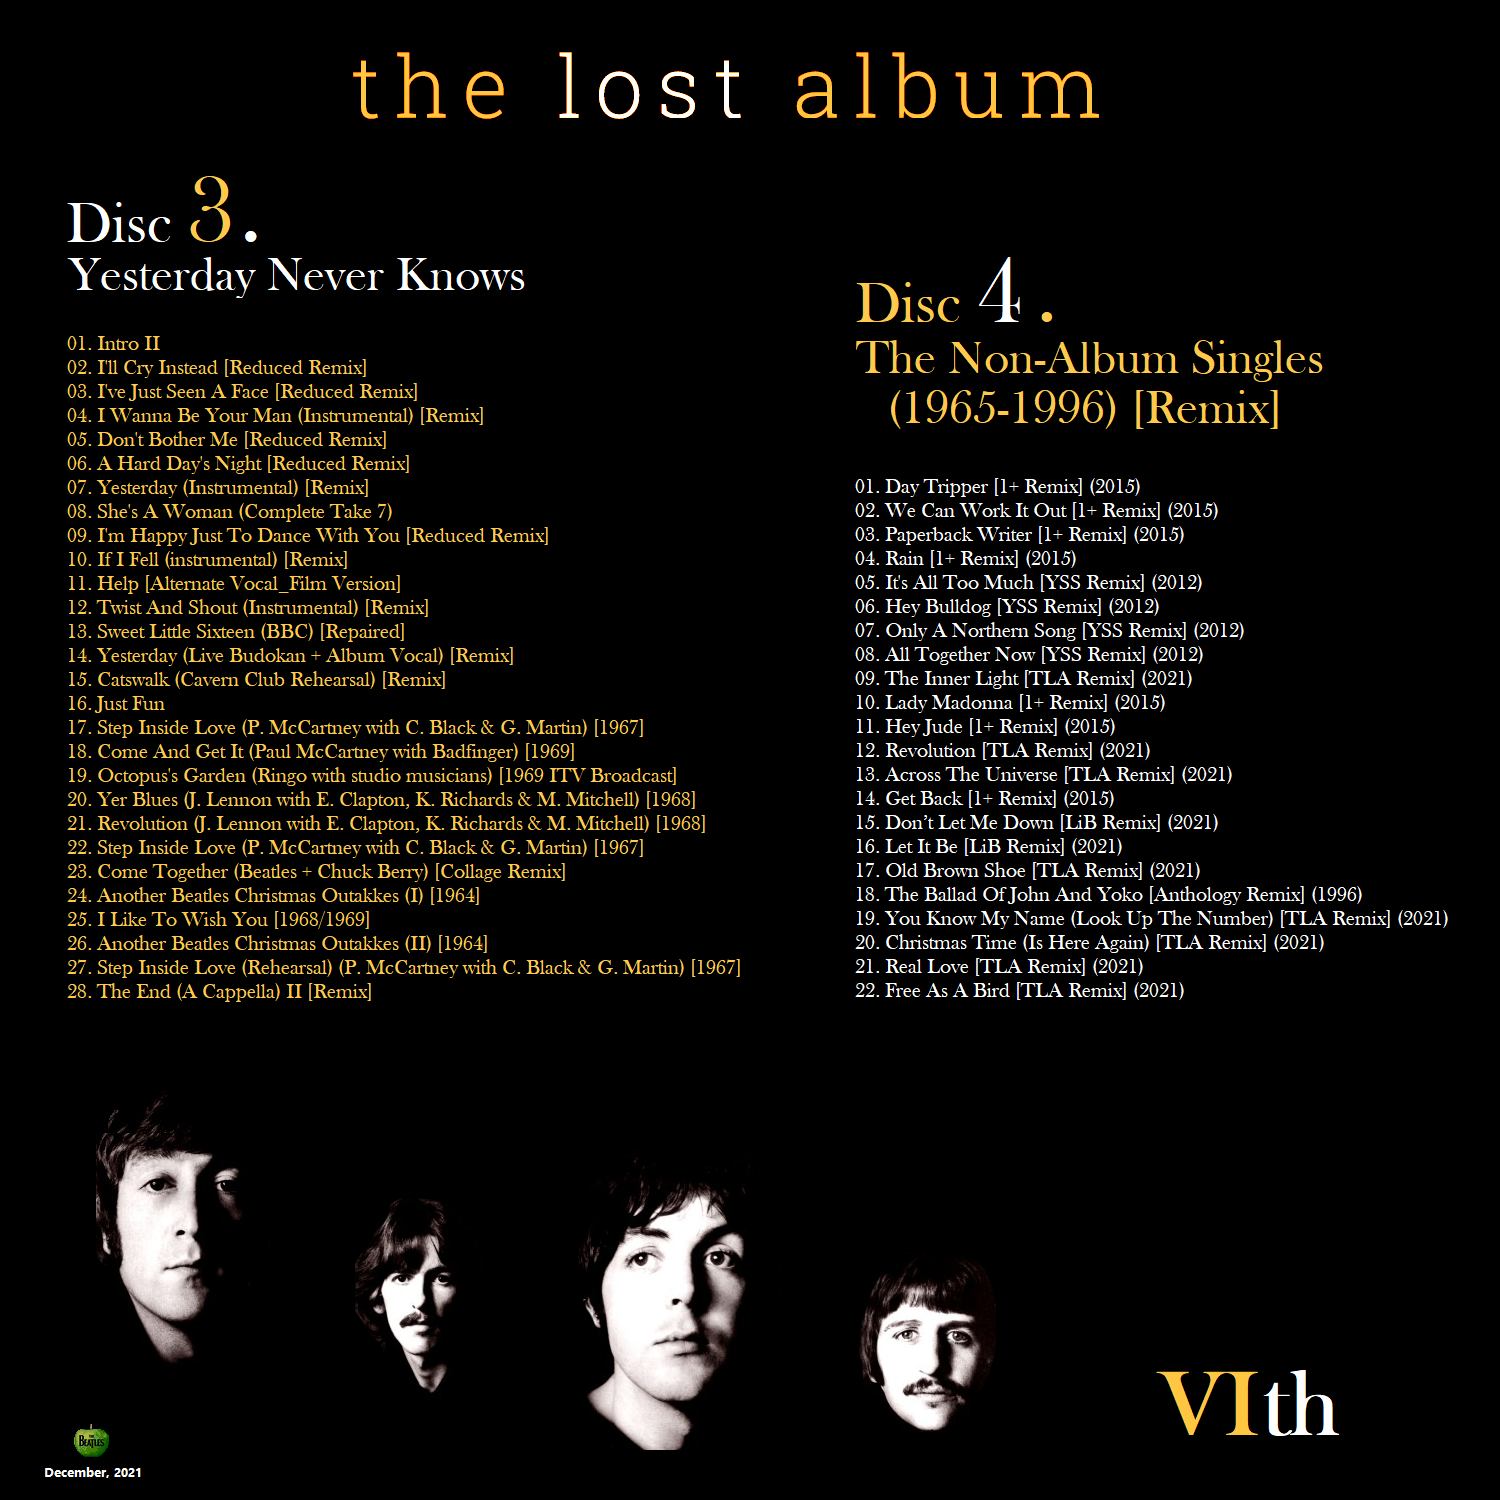 Album_Back_Discs_3_and_4.png